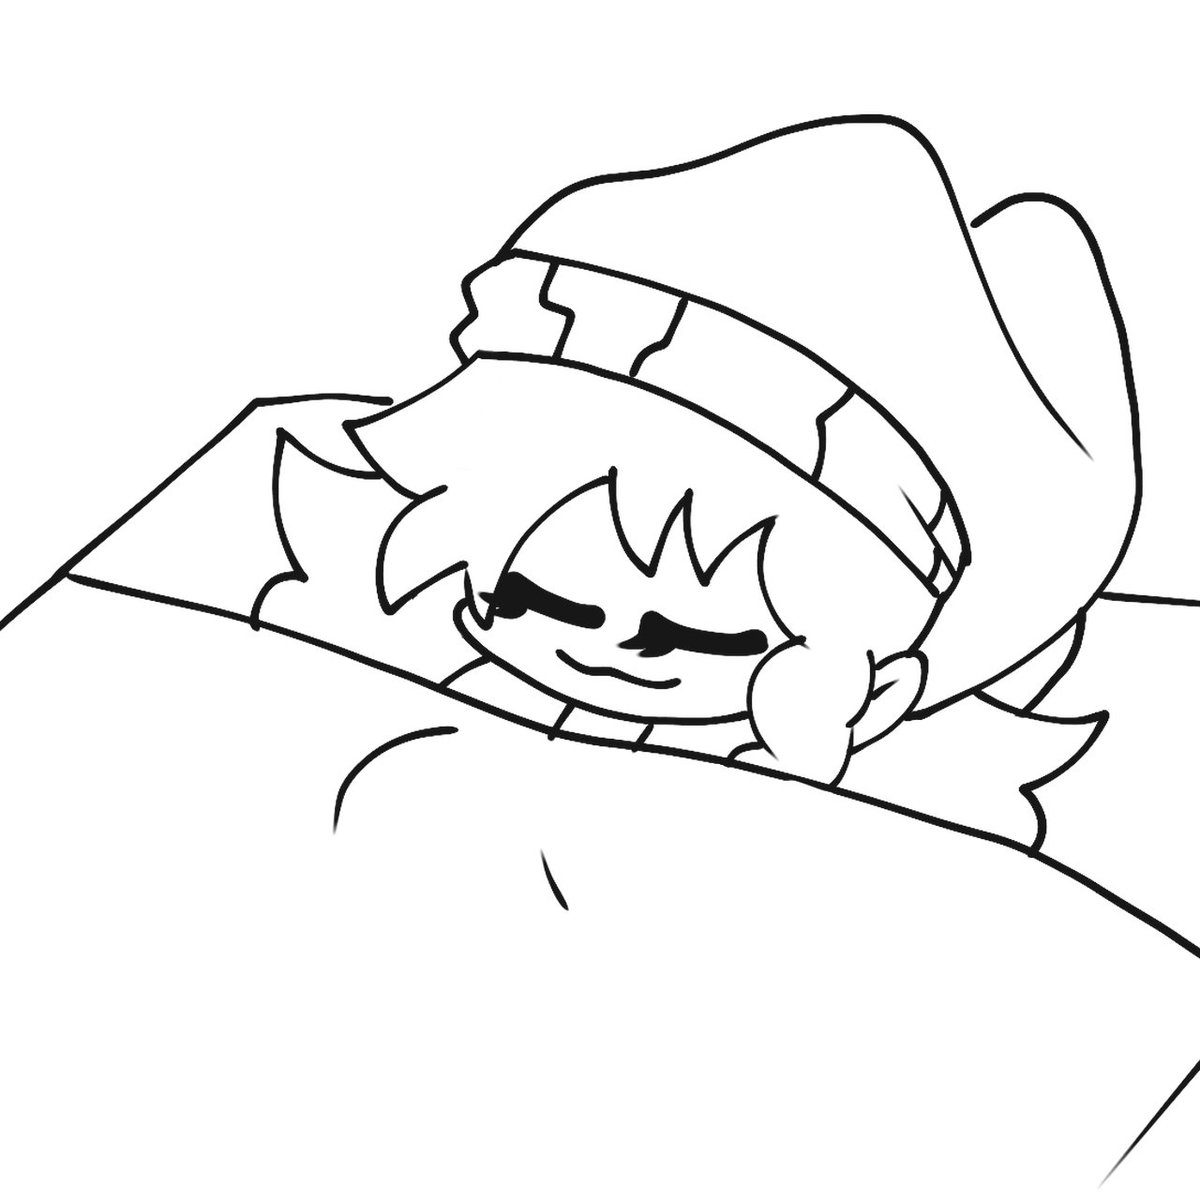 Day 289: me on bed rn:

#fnf #fnflullaby #hypnoslullaby #hypnolullaby #lullabygf #fnfgf